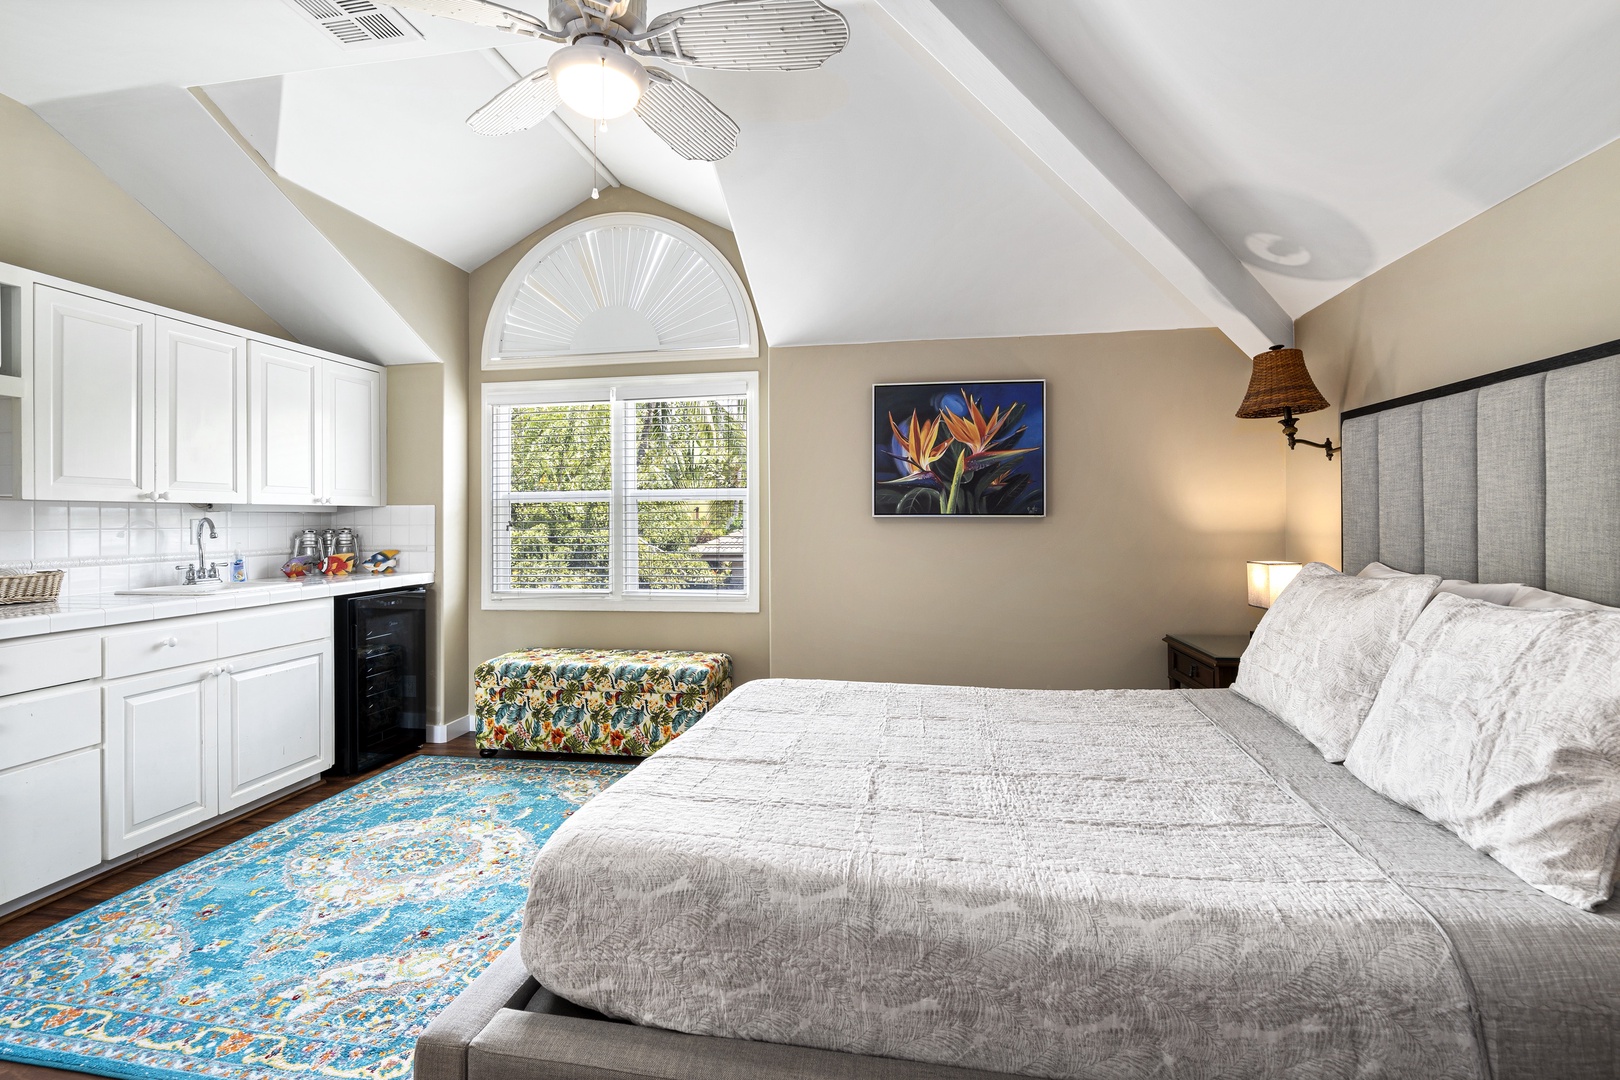 Kailua Kona Vacation Rentals, Kona Blue - Spacious guest room with King bed, central A/C, kitchenette, and vaulted ceilings